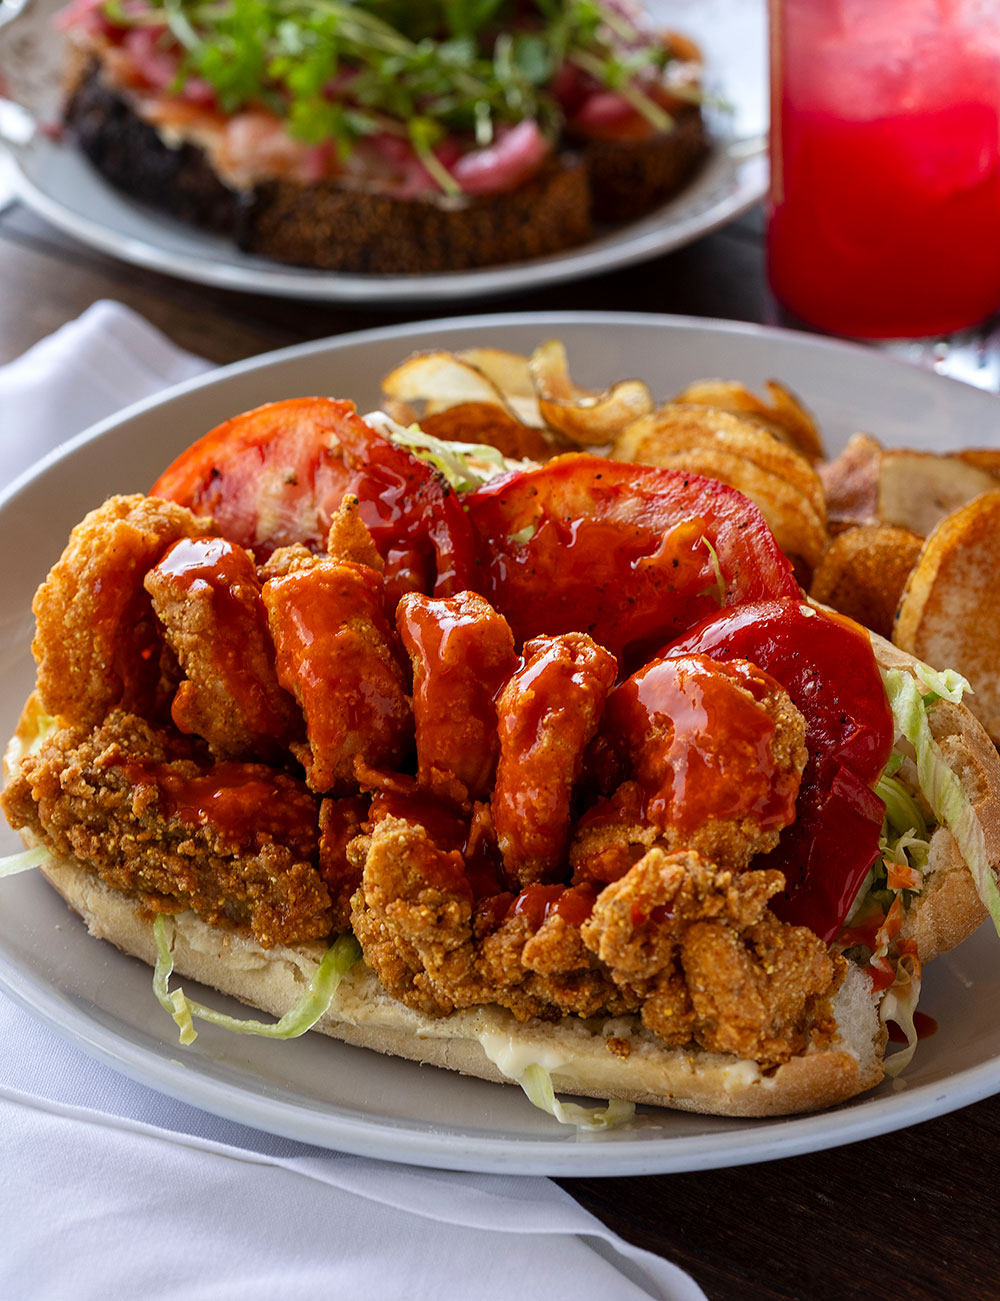 Entrees such as the Peacemaker Po'boy pay homage to chef Speaks' culinary journey from New Orleans.